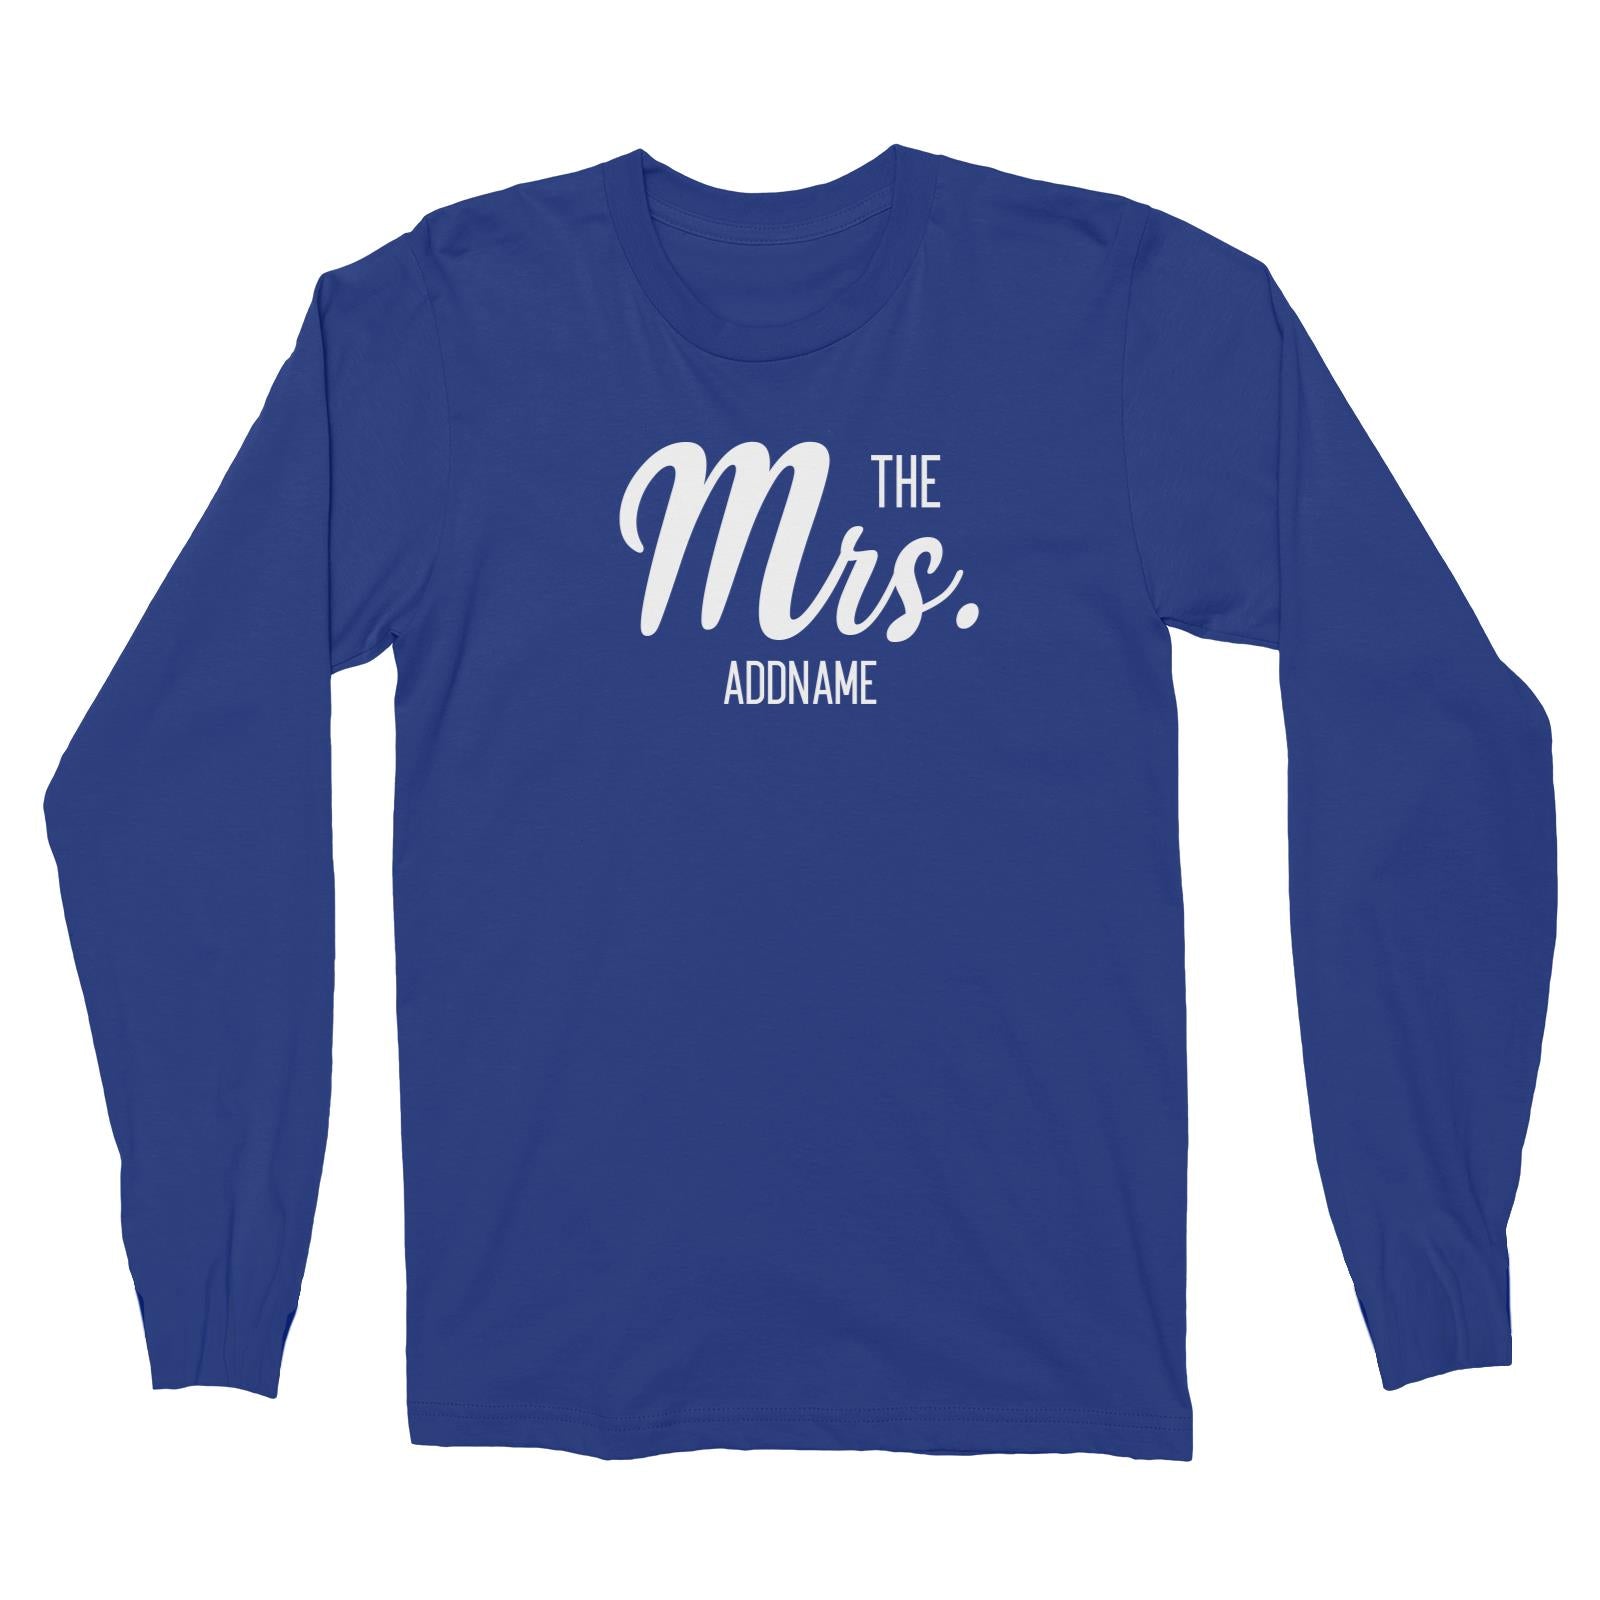 Husband and Wife The Mrs. Addname Long Sleeve Unisex T-Shirt